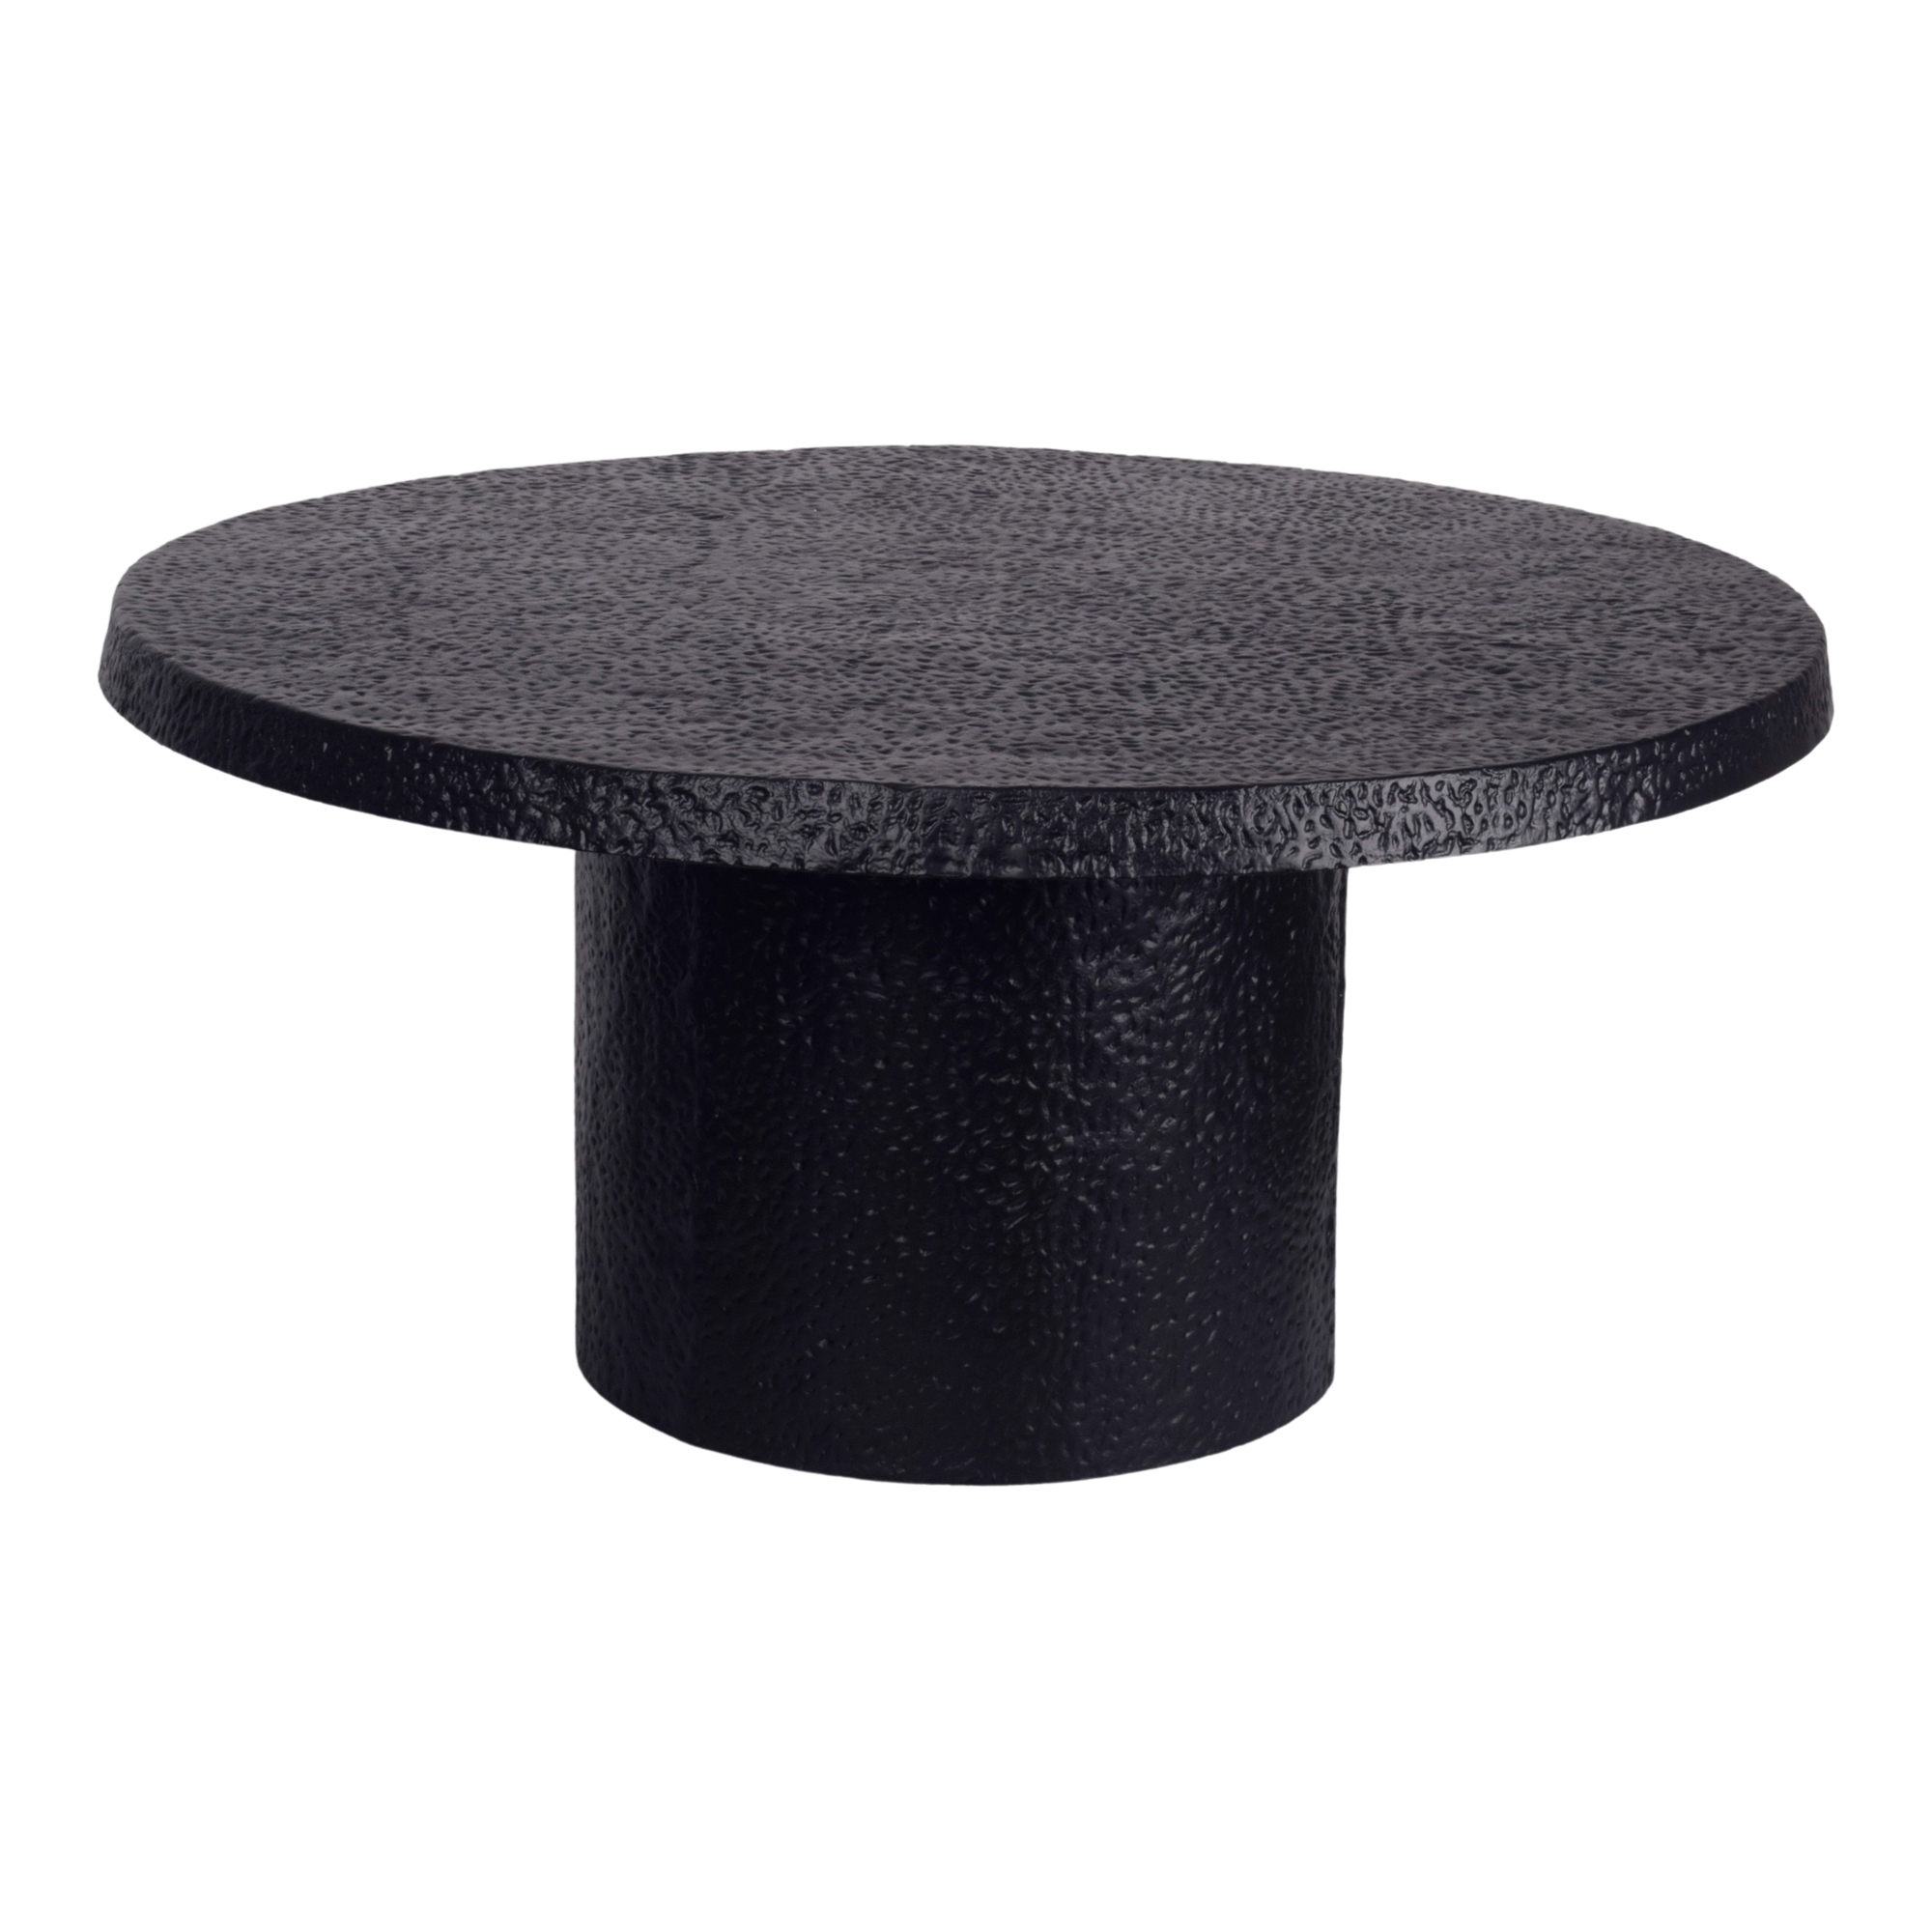 Aulo Coffee Table - Image 1